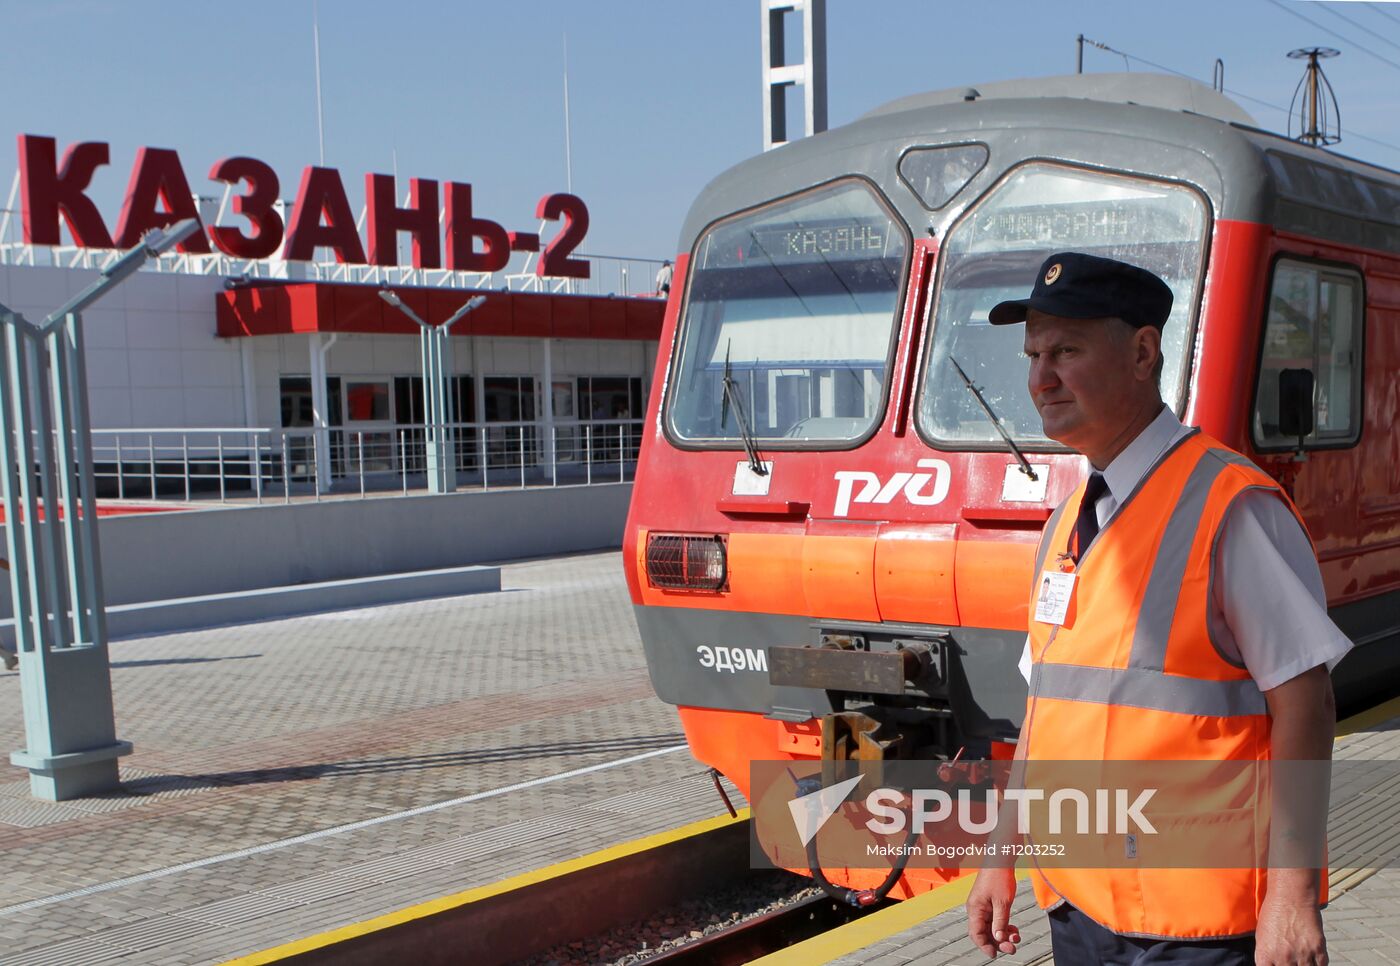 Opening of second railway station in Kazan